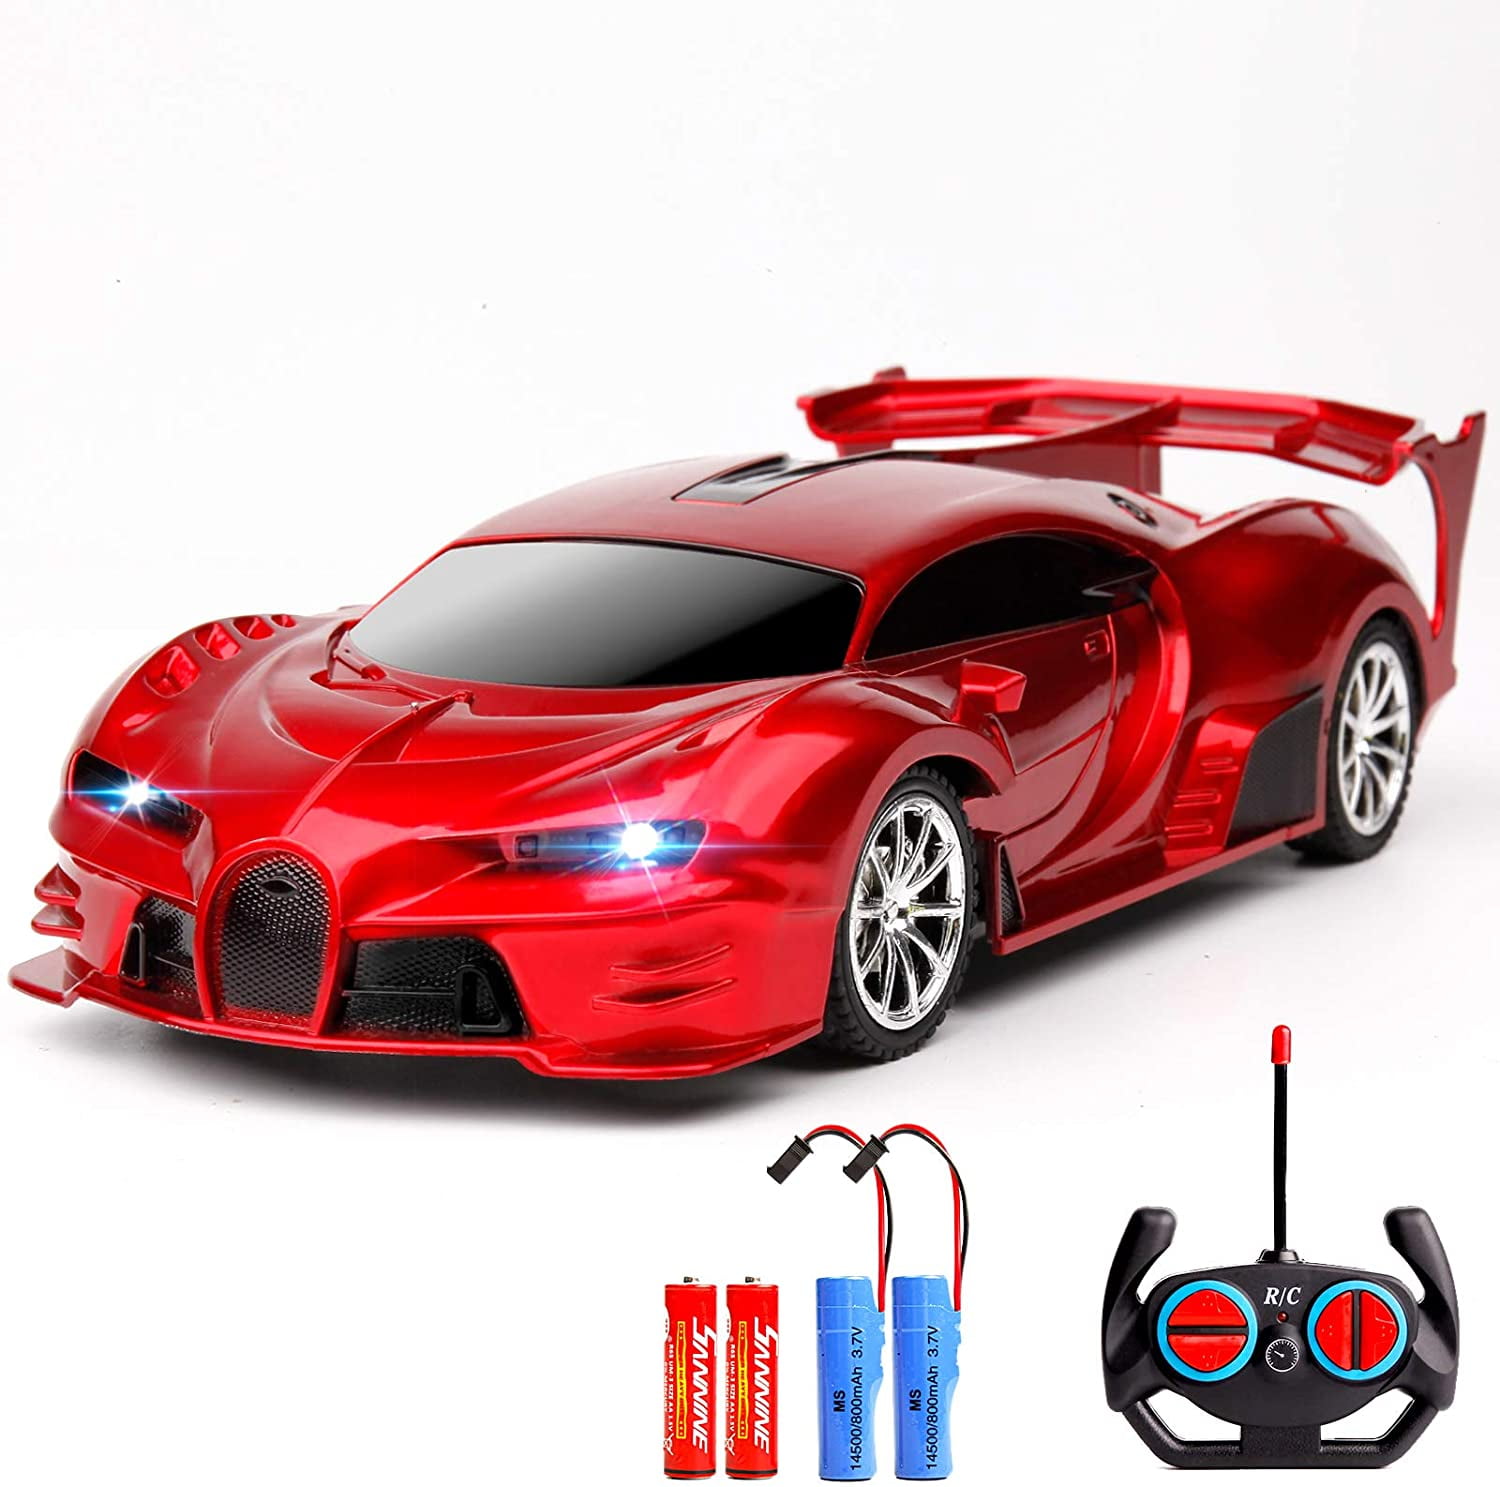 LARGE BUGATTI VISION GRAN TURISMO RECHARGEABLE Remote Control Car AUTO DOORS RED 